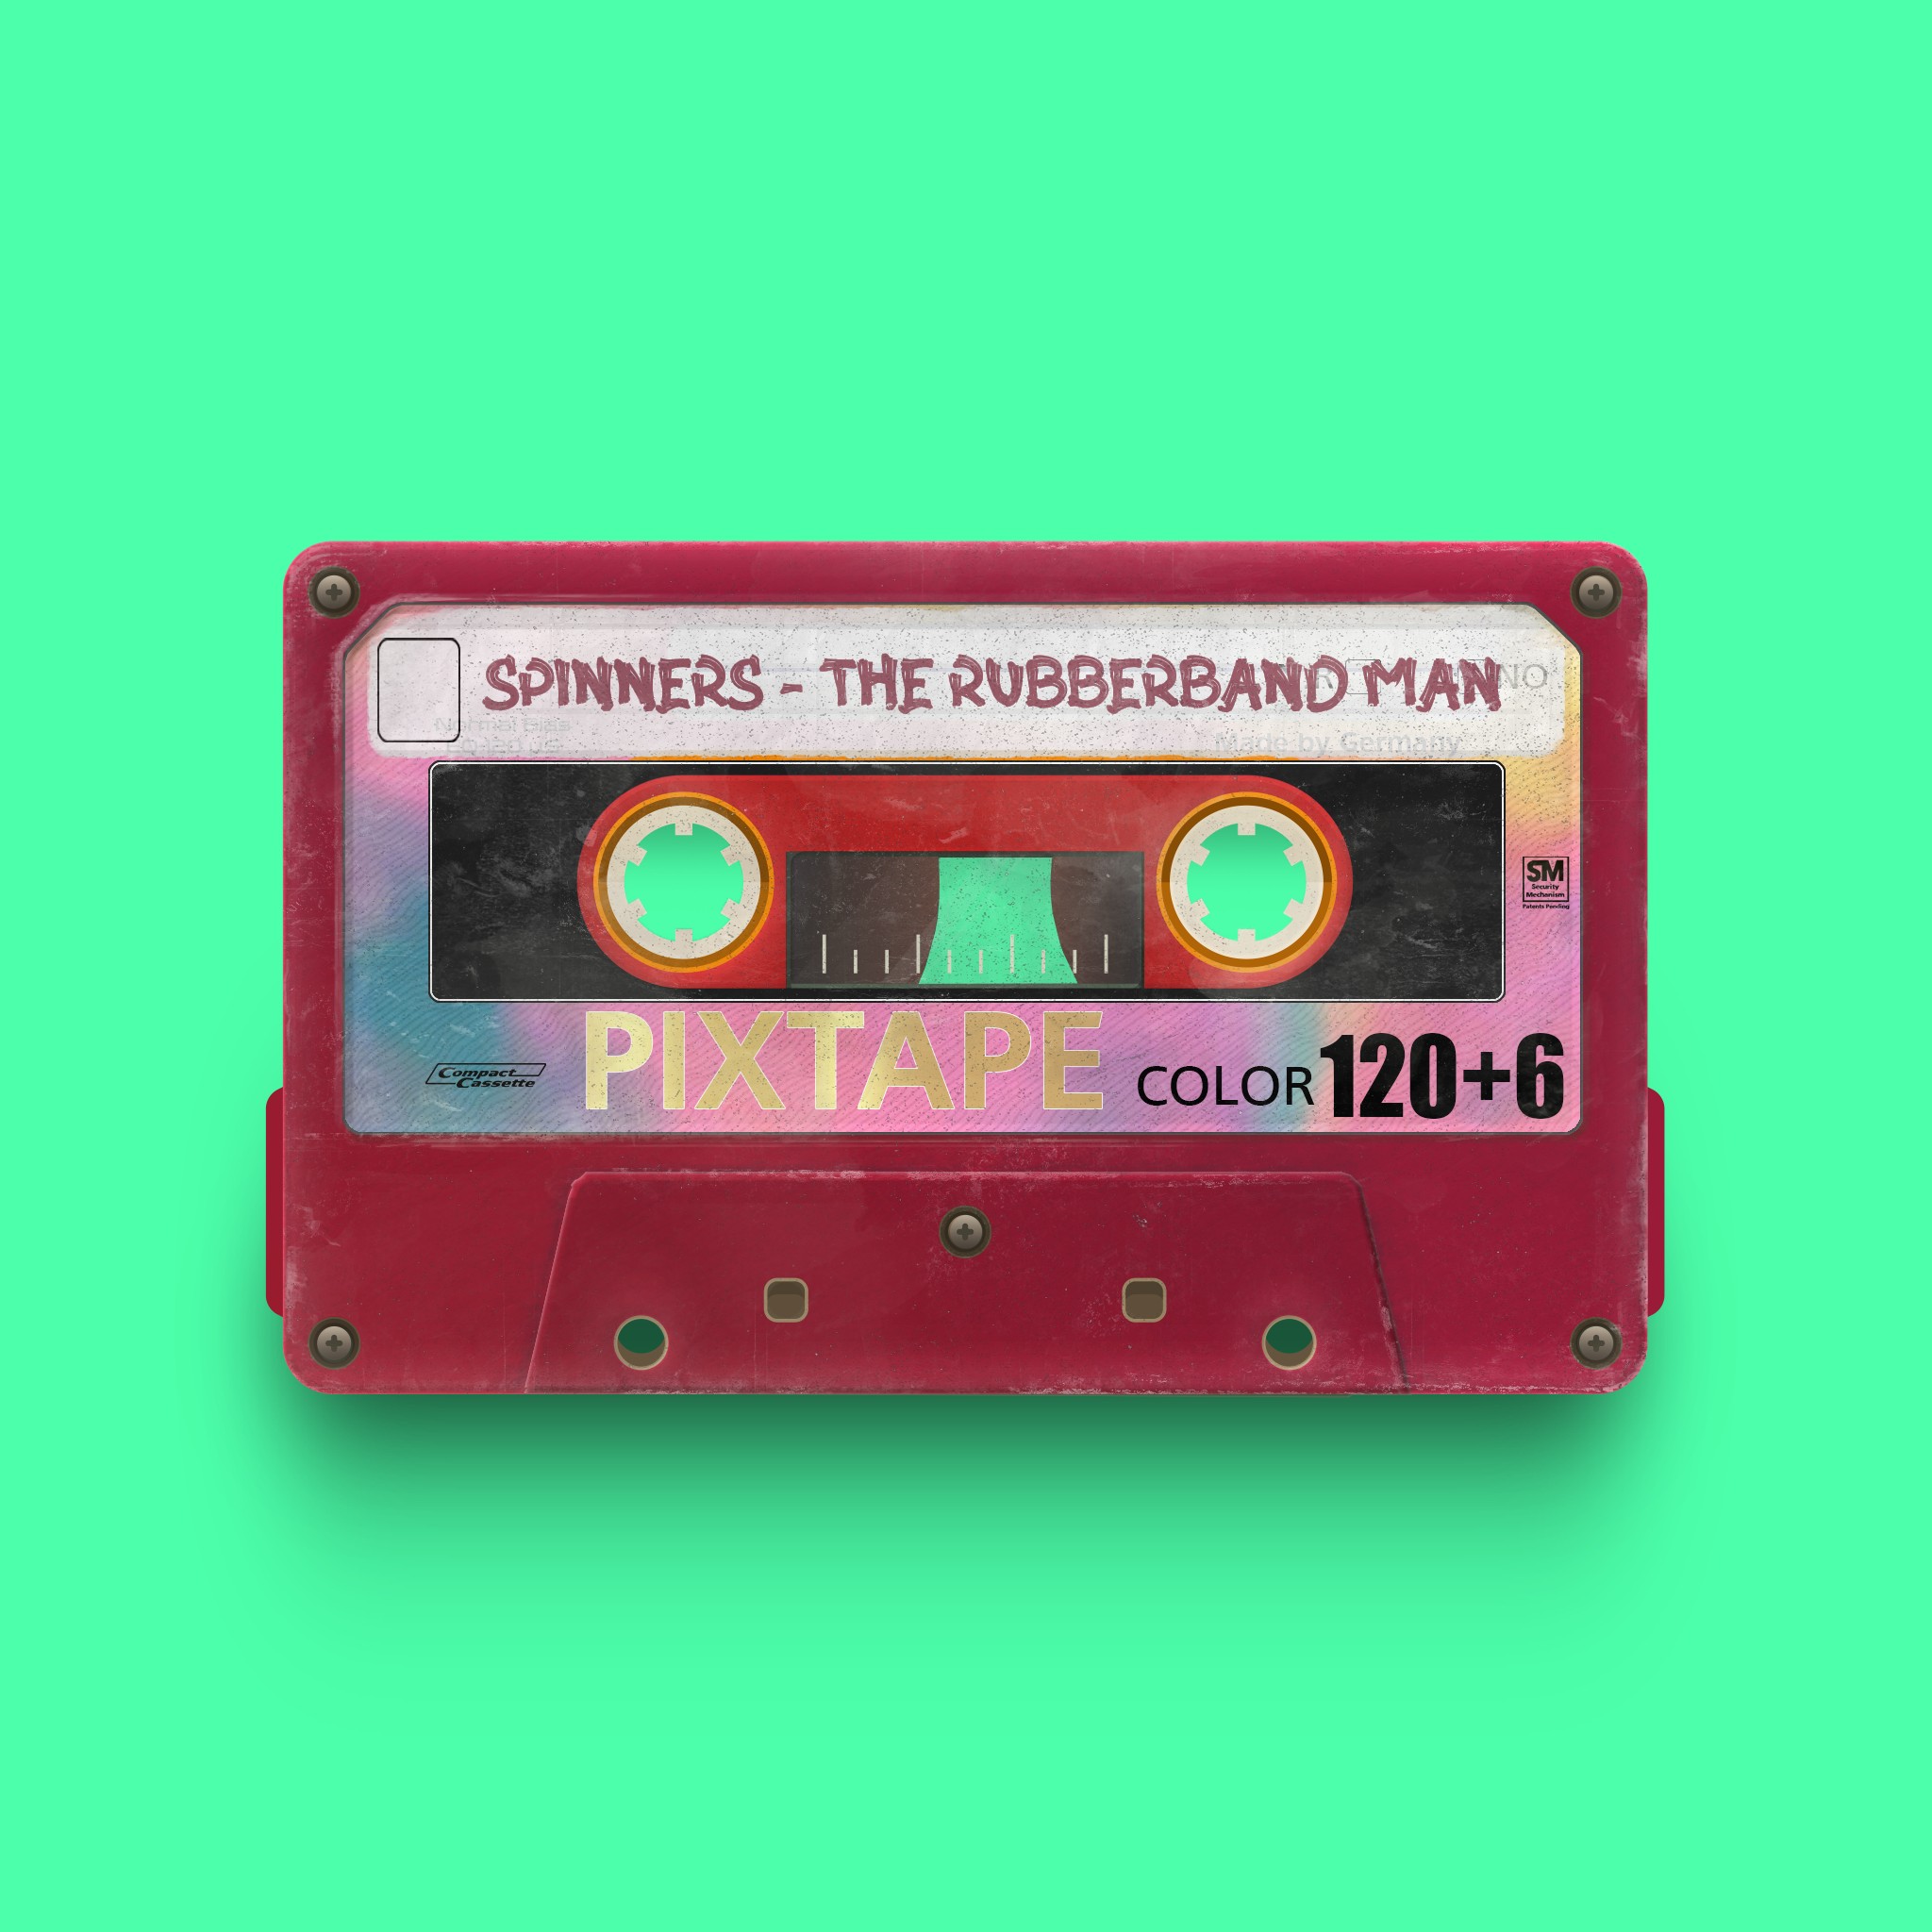 PixTape #24 | Spinners - The Rubberband Man